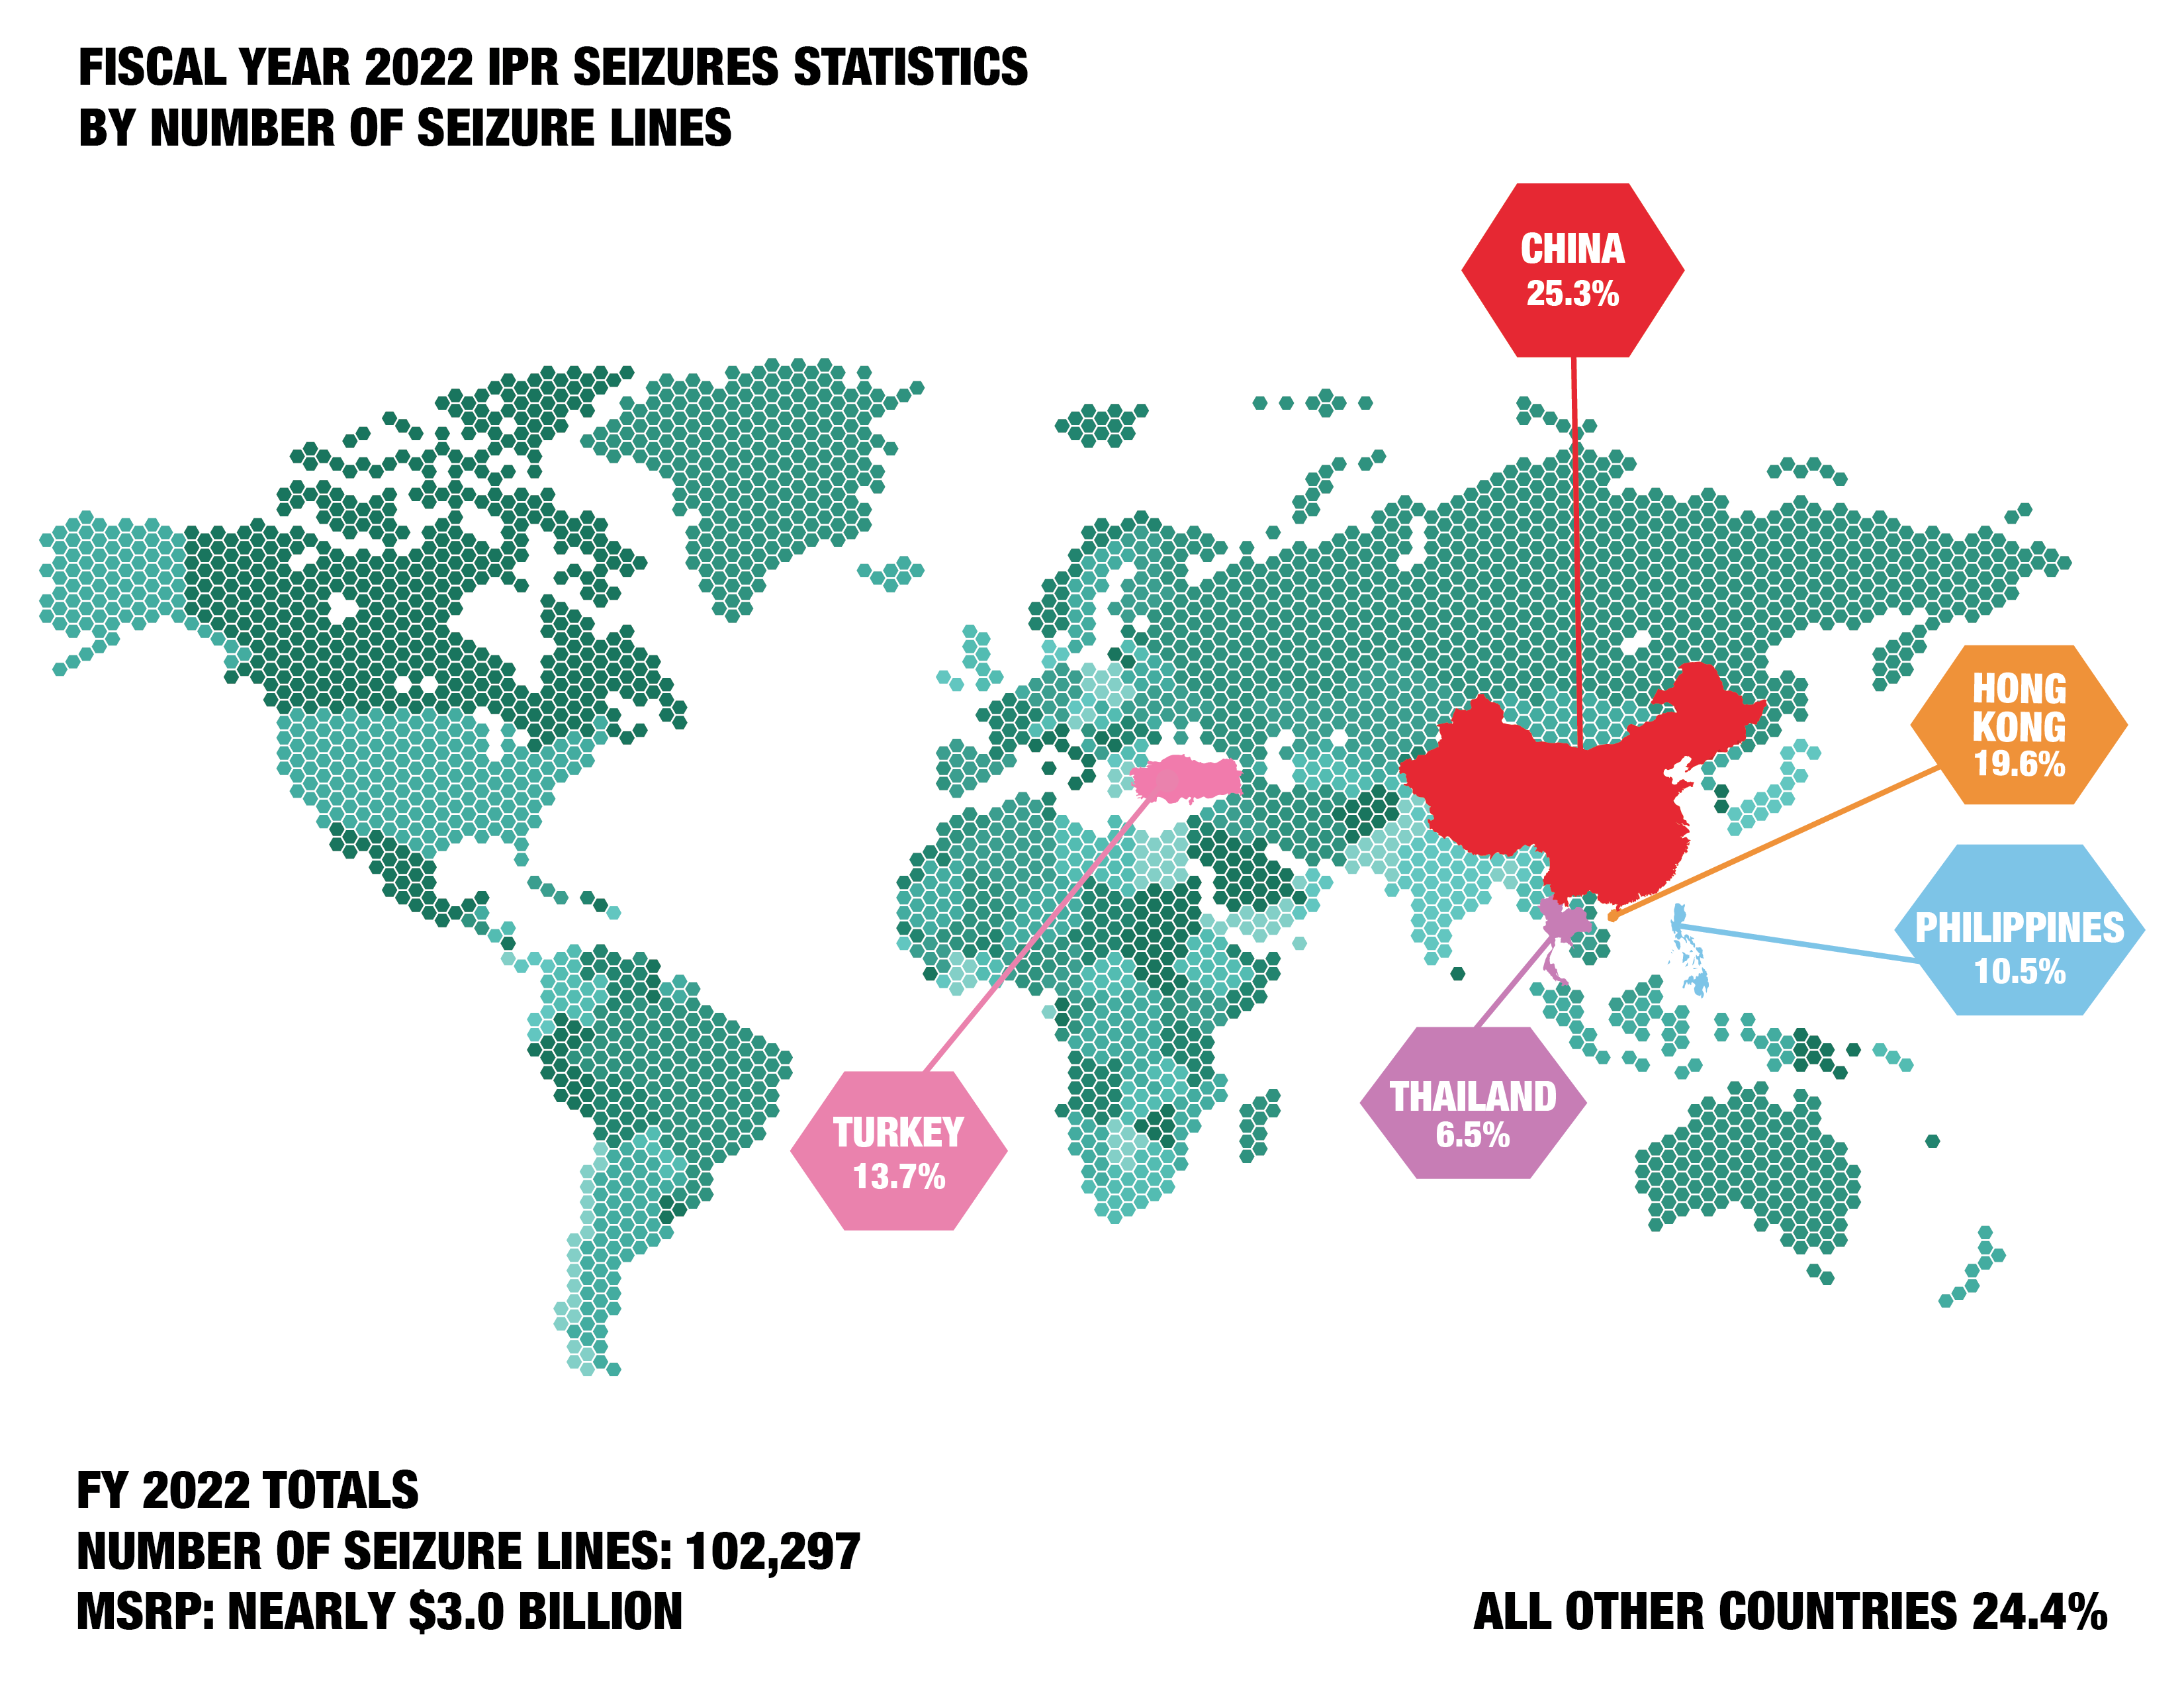 World Map: Fiscal Year 2022 IPR Seizures Statistics by Number of Seizure Lines. China: 25.3%; Hong Kong: 19.6%; Turkey: 13.7%; Philippines: 10.5%; Thailand: 6.5%; All Other Countries: 24.4%. FY 2022 Totals Number of Seizure Lines: 102,297. MSRP: nearly $3.0 Billion. 